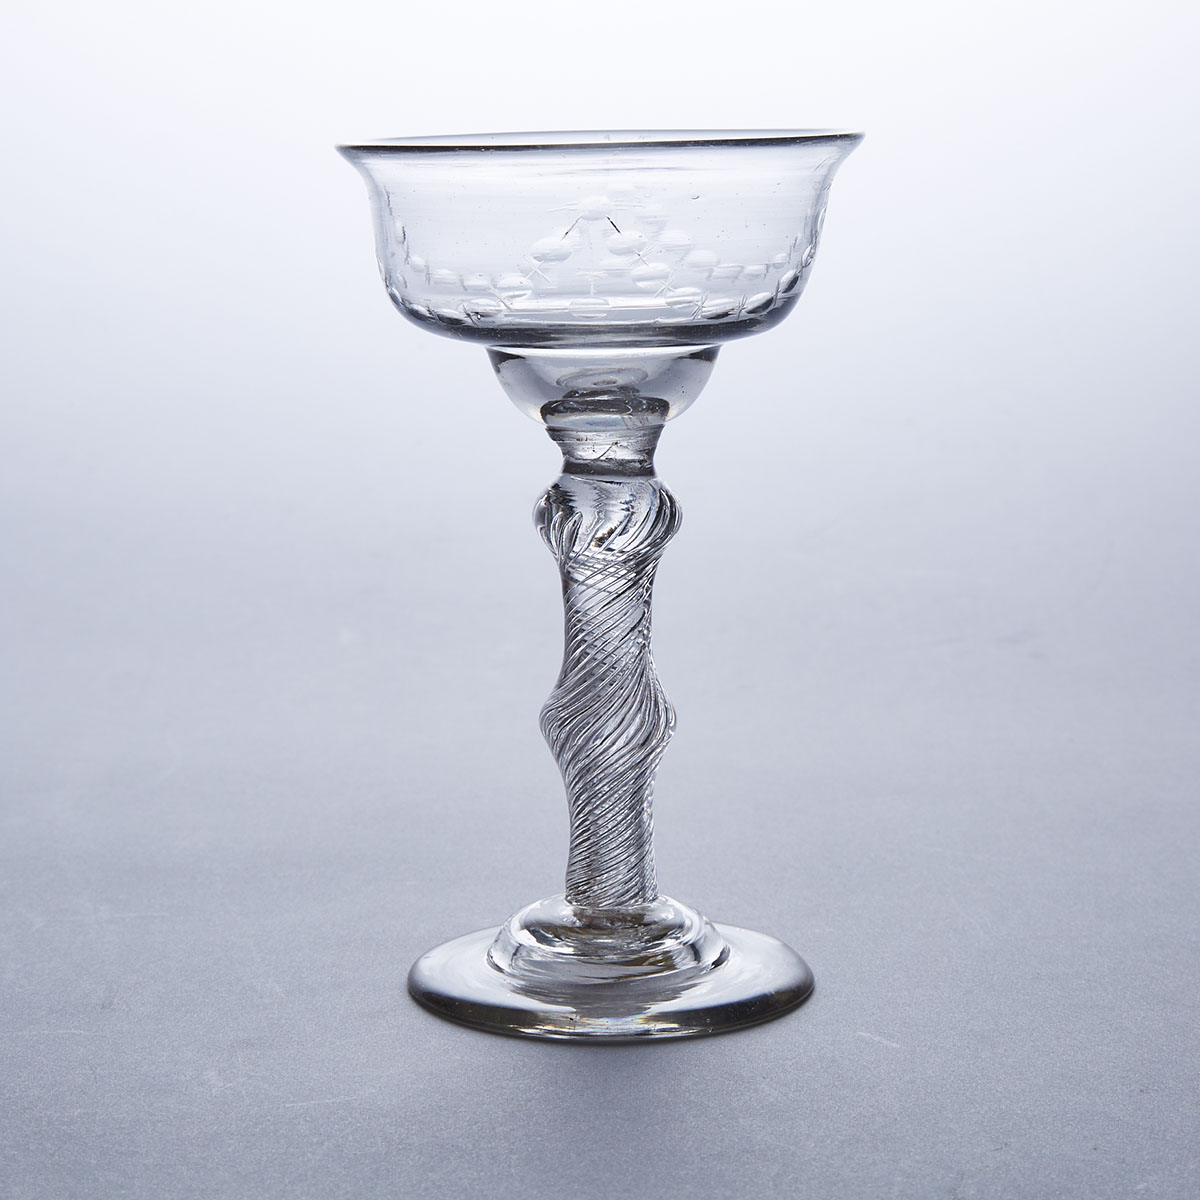 English Engraved Airtwist Stemmed Sweetmeat or Champagne Glass, c.1750-60